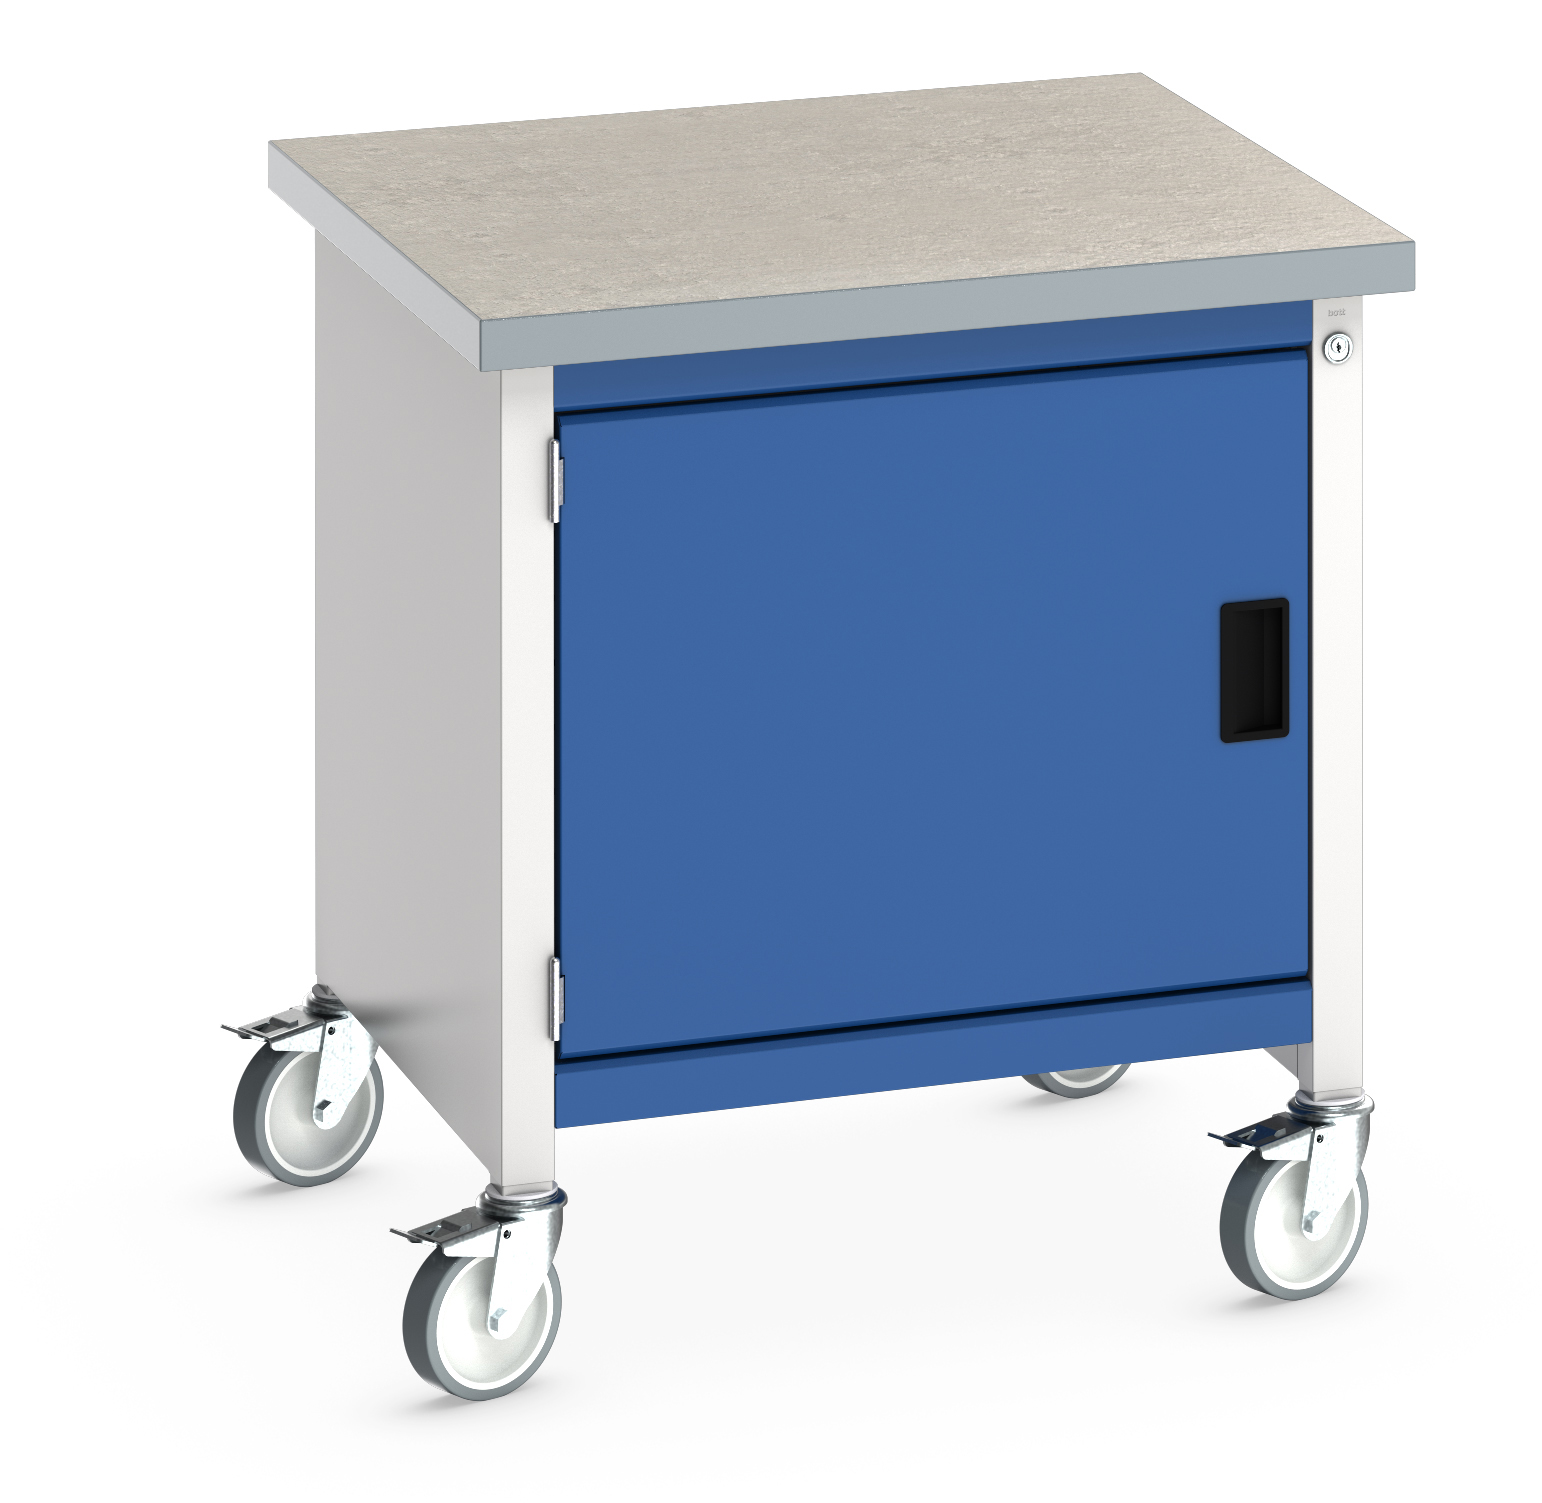 Bott Cubio Mobile Storage Bench With Full Cupboard - 41002087.11V